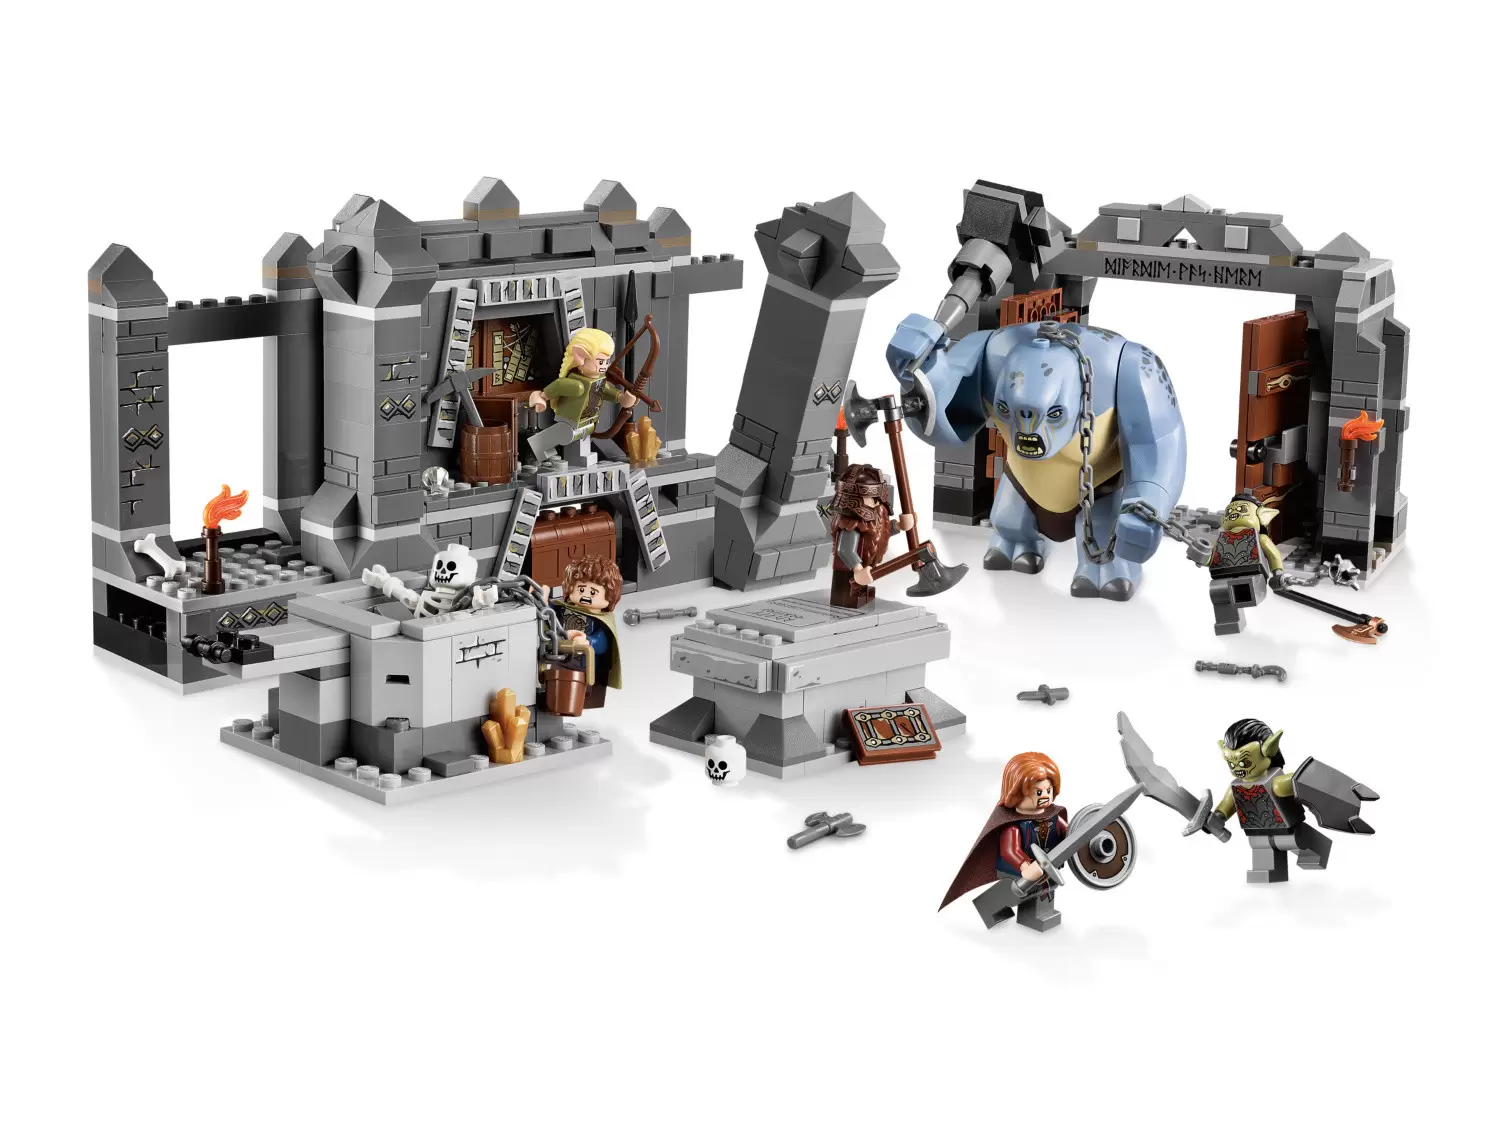 LEGO Lord of the Rings - The Mines of Moria